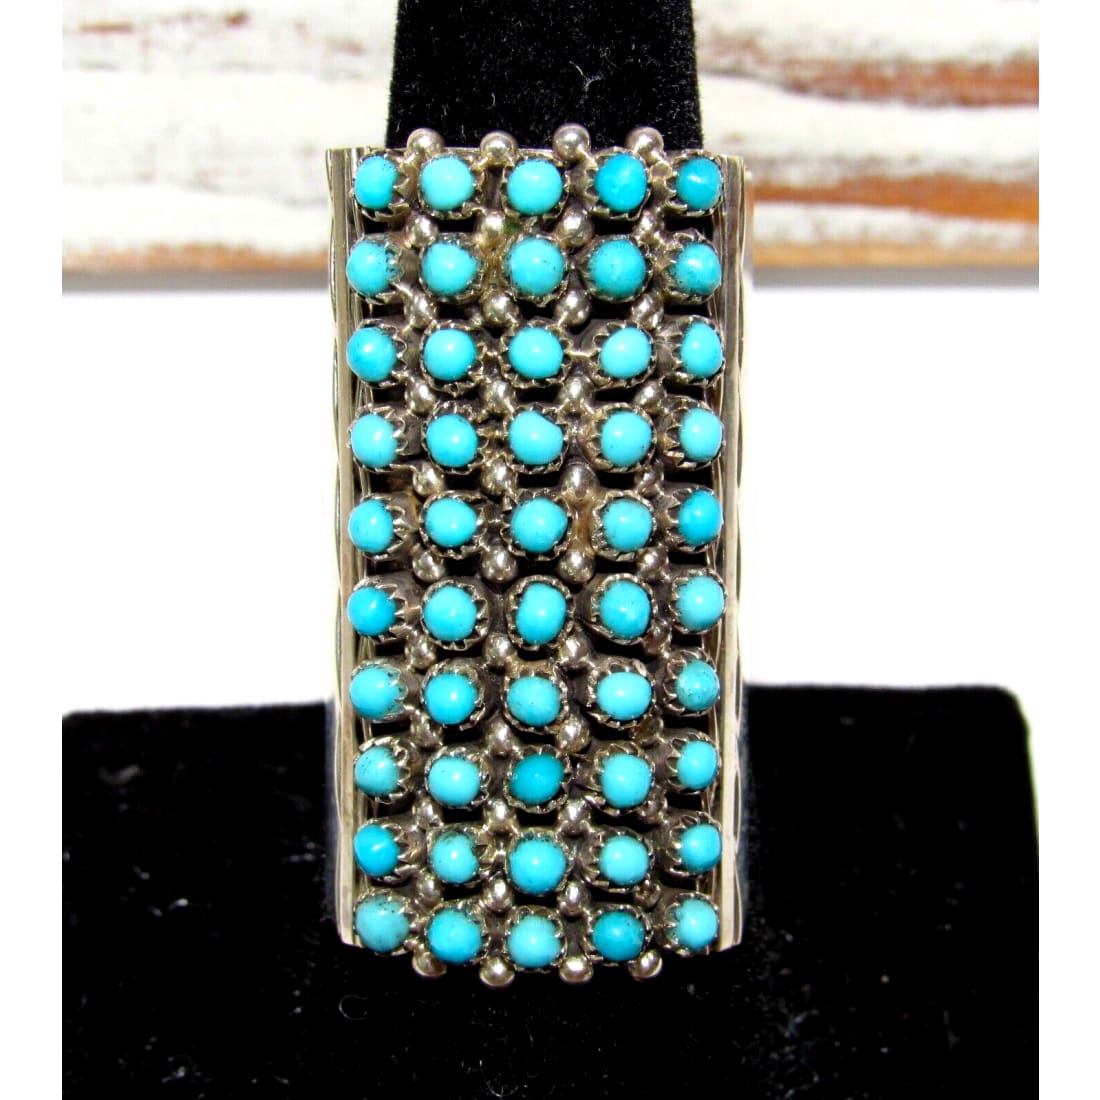 Zuni Snake Eye Turquoise Cluster Ring Size 9 Sterling Silver